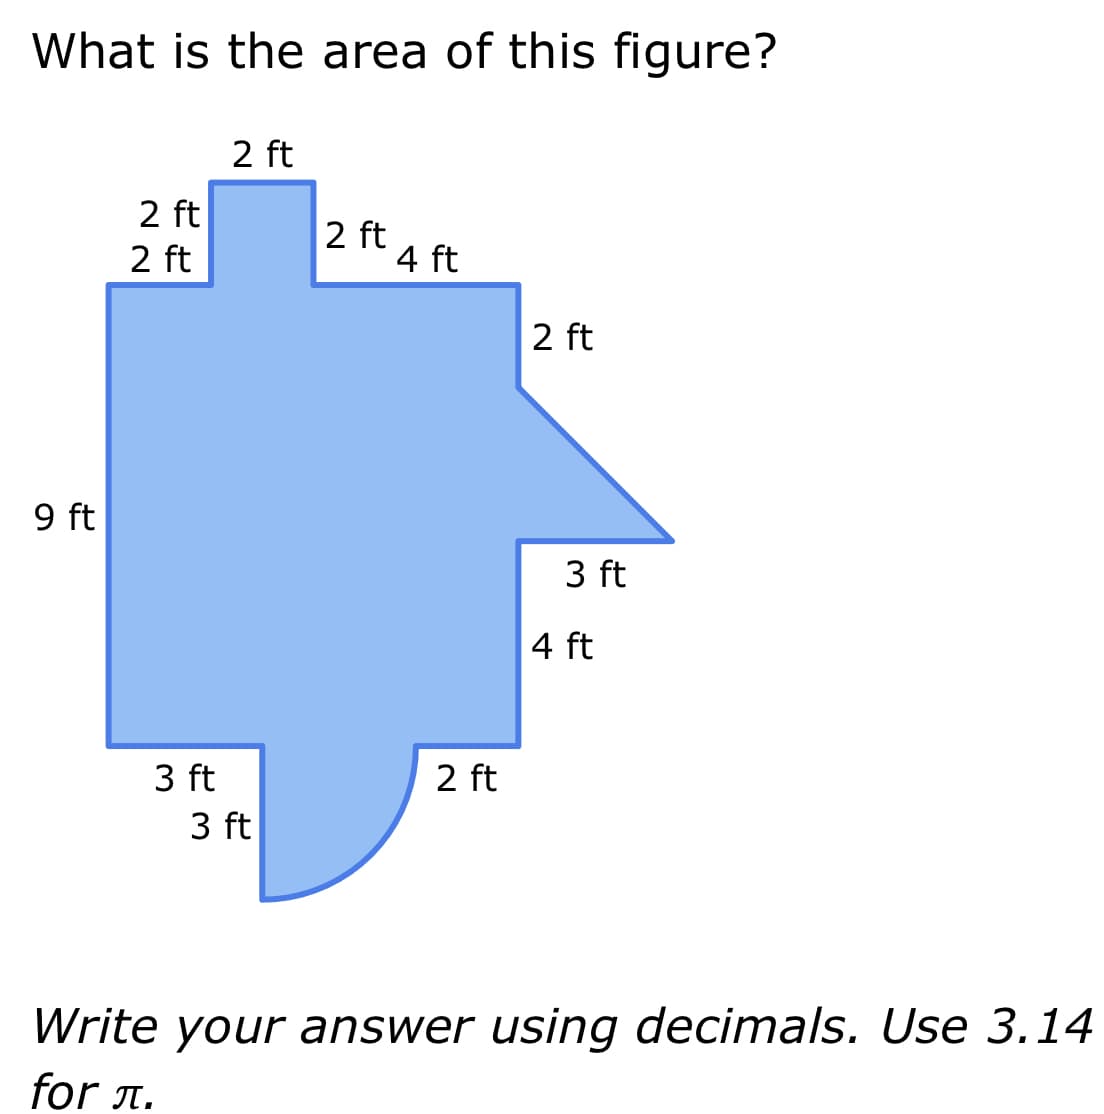 What is the area of this figure?
9 ft
2 ft
2 ft
2 ft
3 ft
3 ft
2 ft
4 ft
2 ft
2 ft
3 ft
4 ft
Write your answer using decimals. Use 3.14
for л.